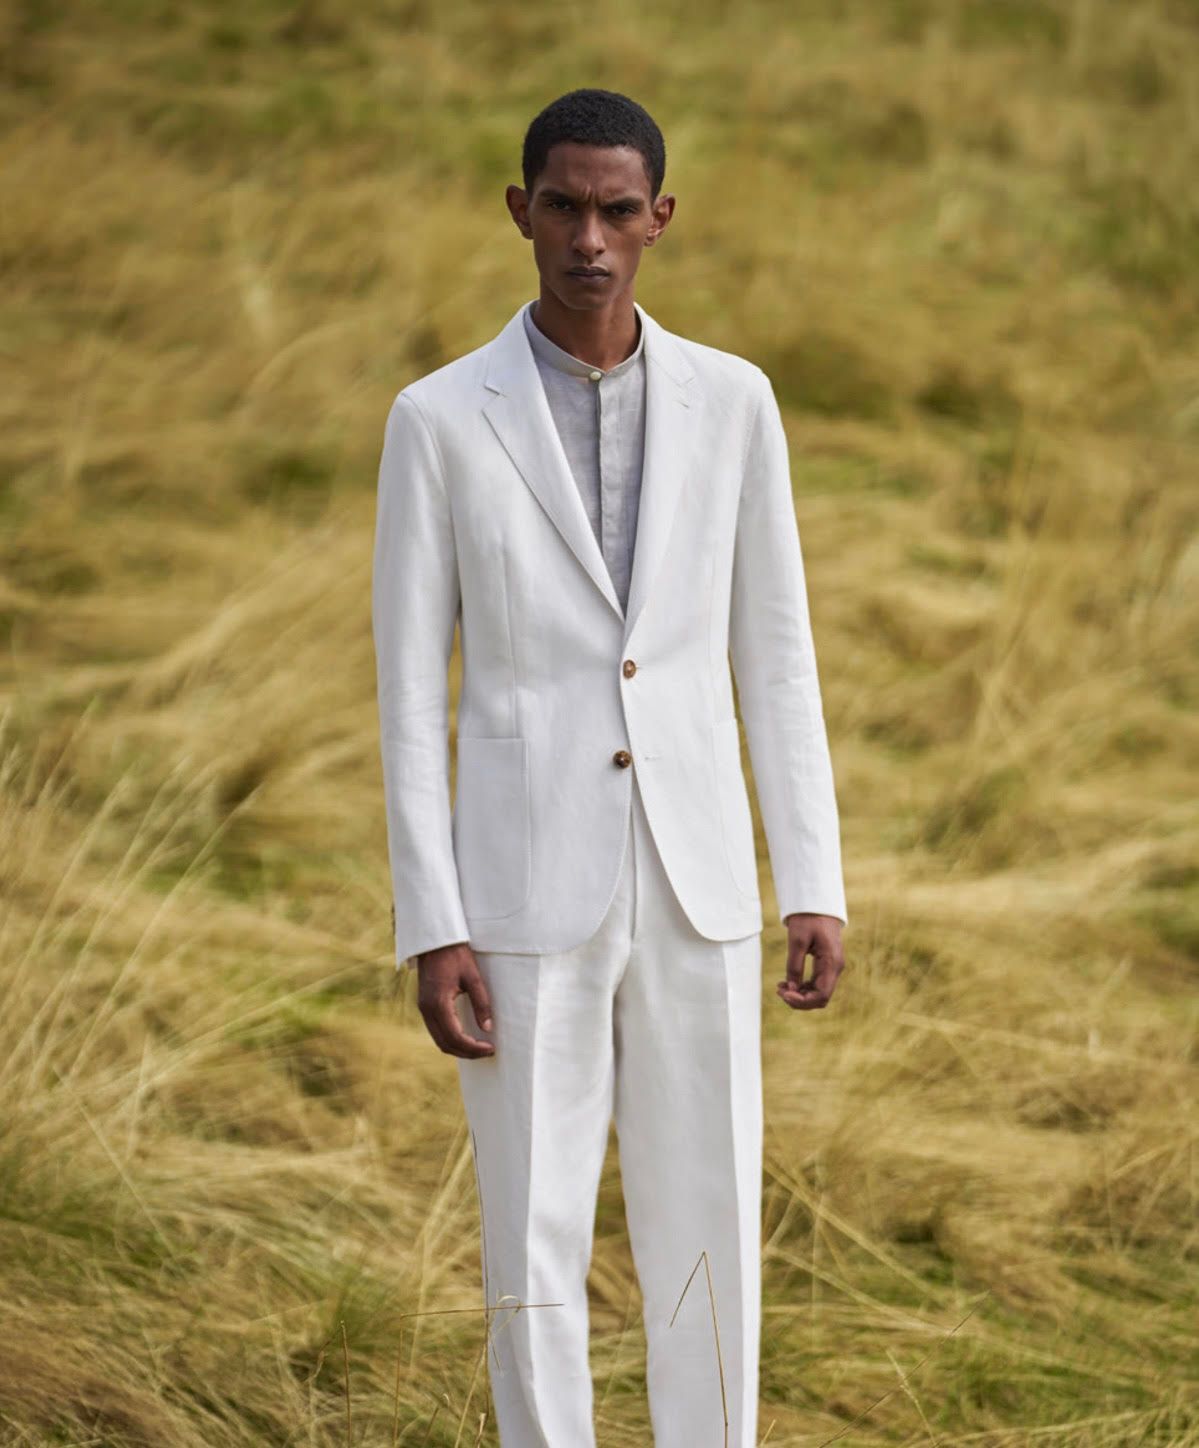 A man in a white suit is standing in a field of tall grass.